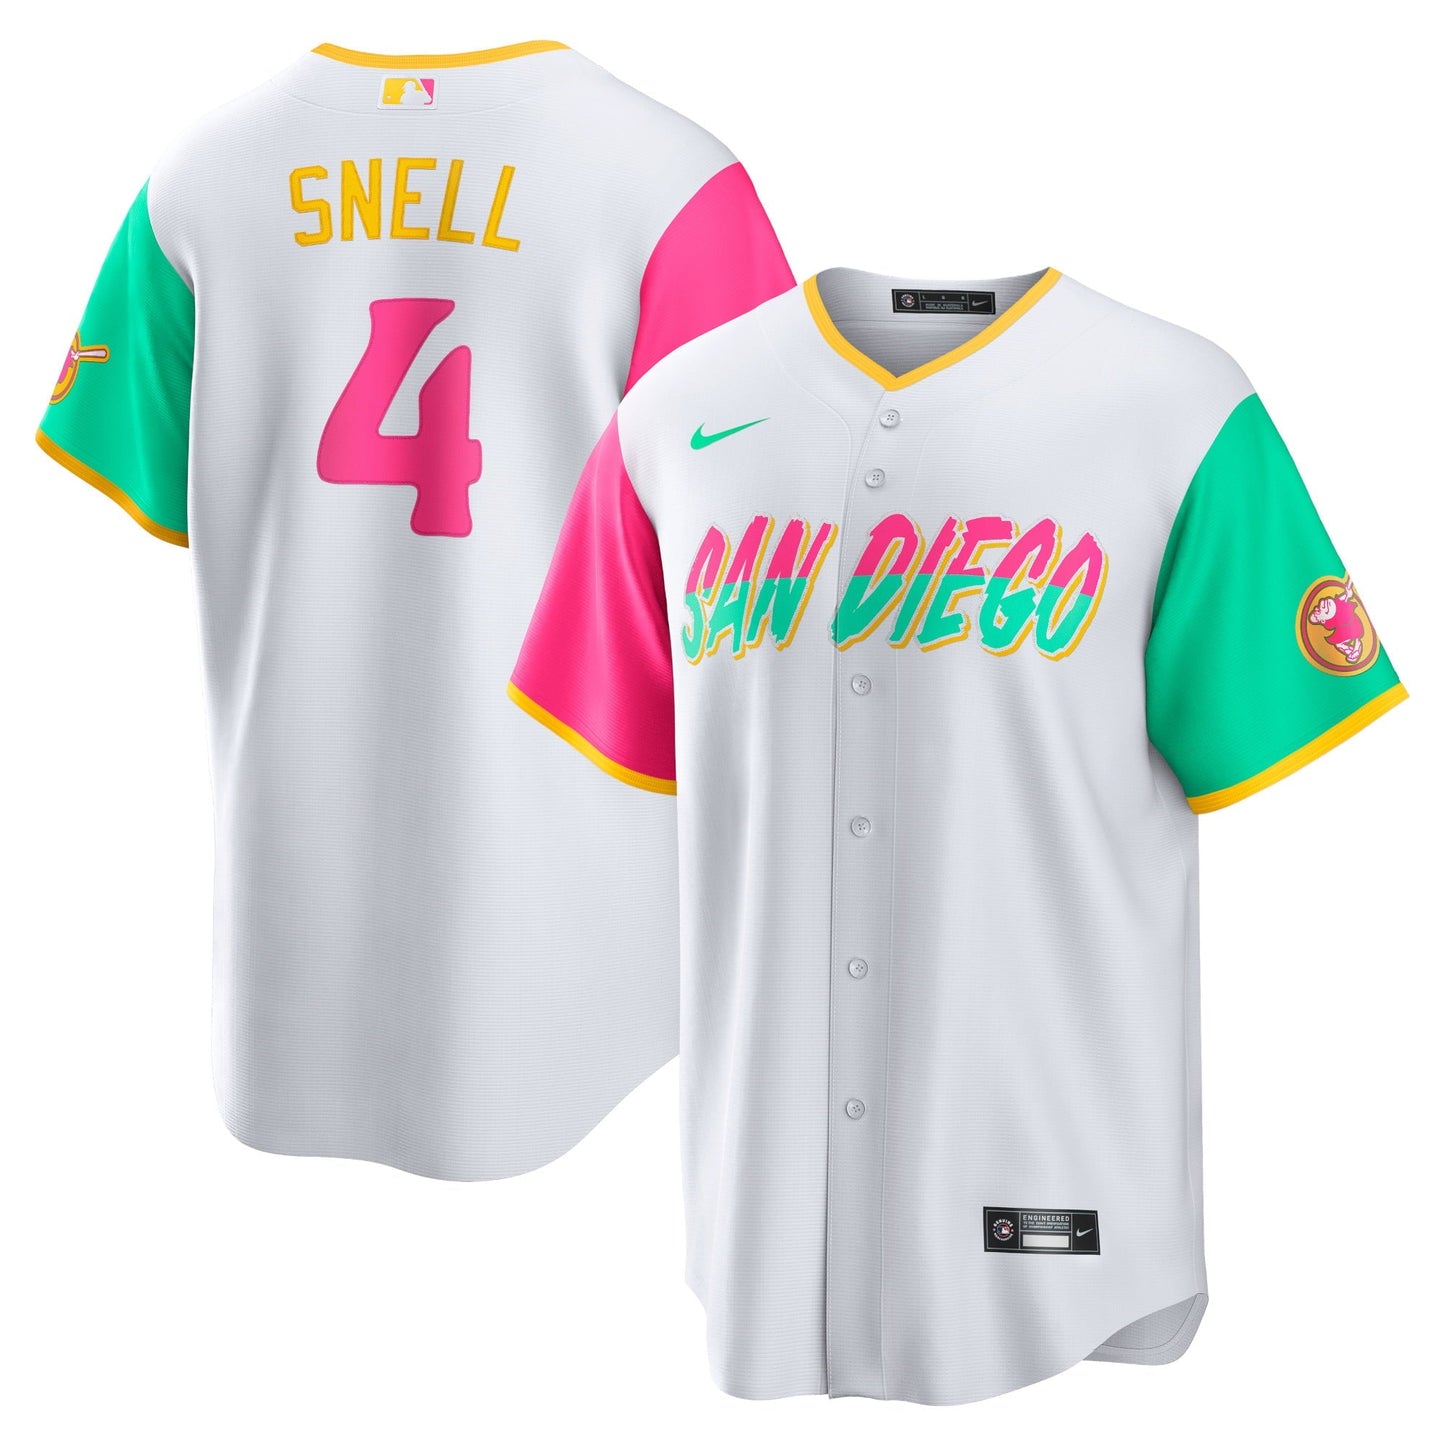 Blake Snell Jersey, Blake Snell Gear and Apparel